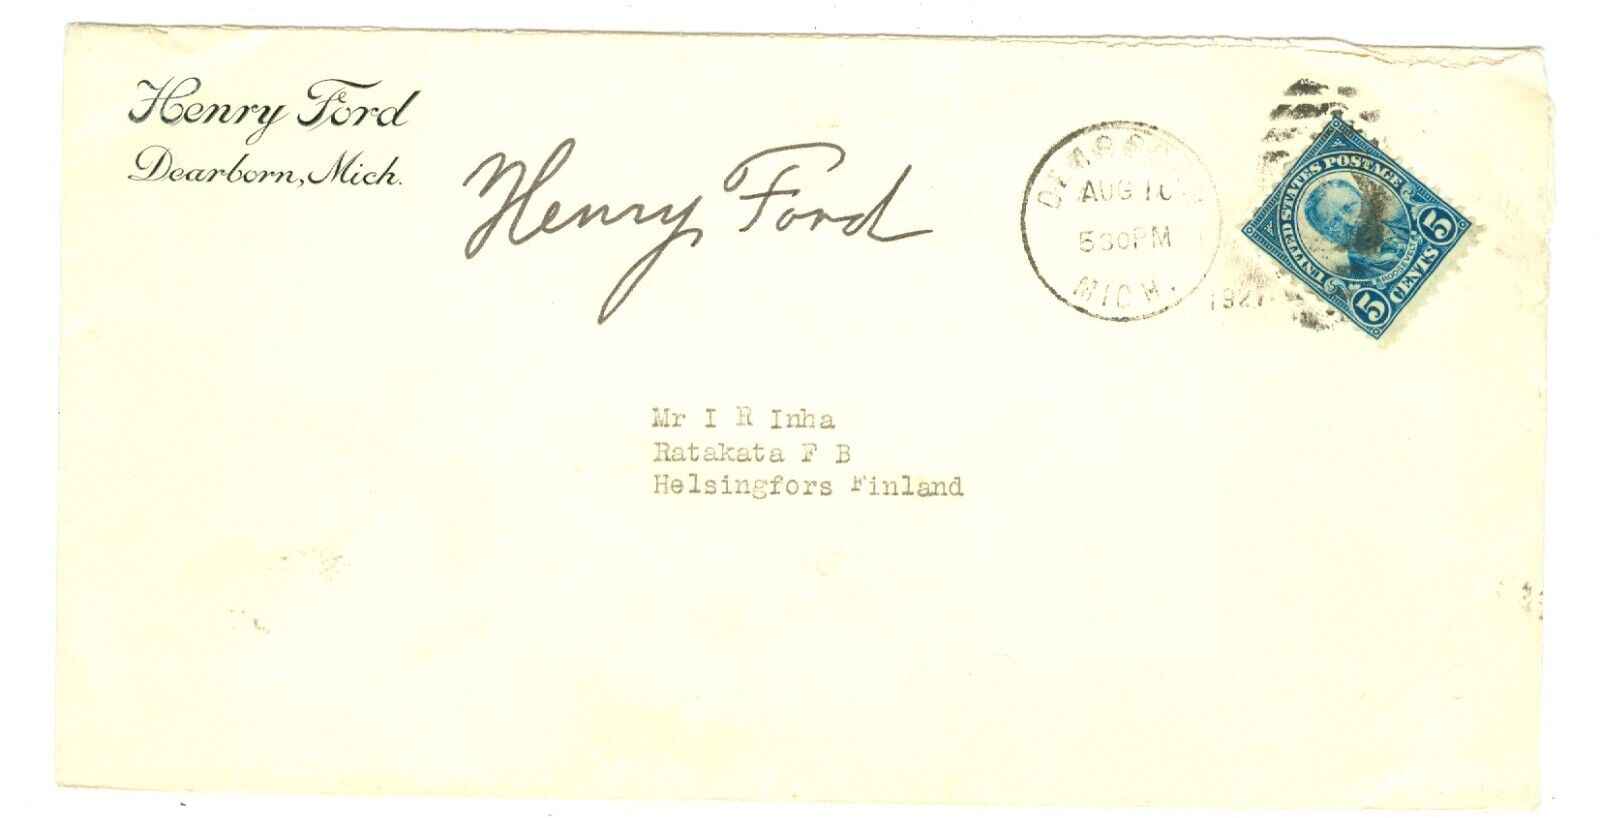 SCARCE 1930 HENRY FORD SIGNED ENVELOPE,  AUTOGRAPH